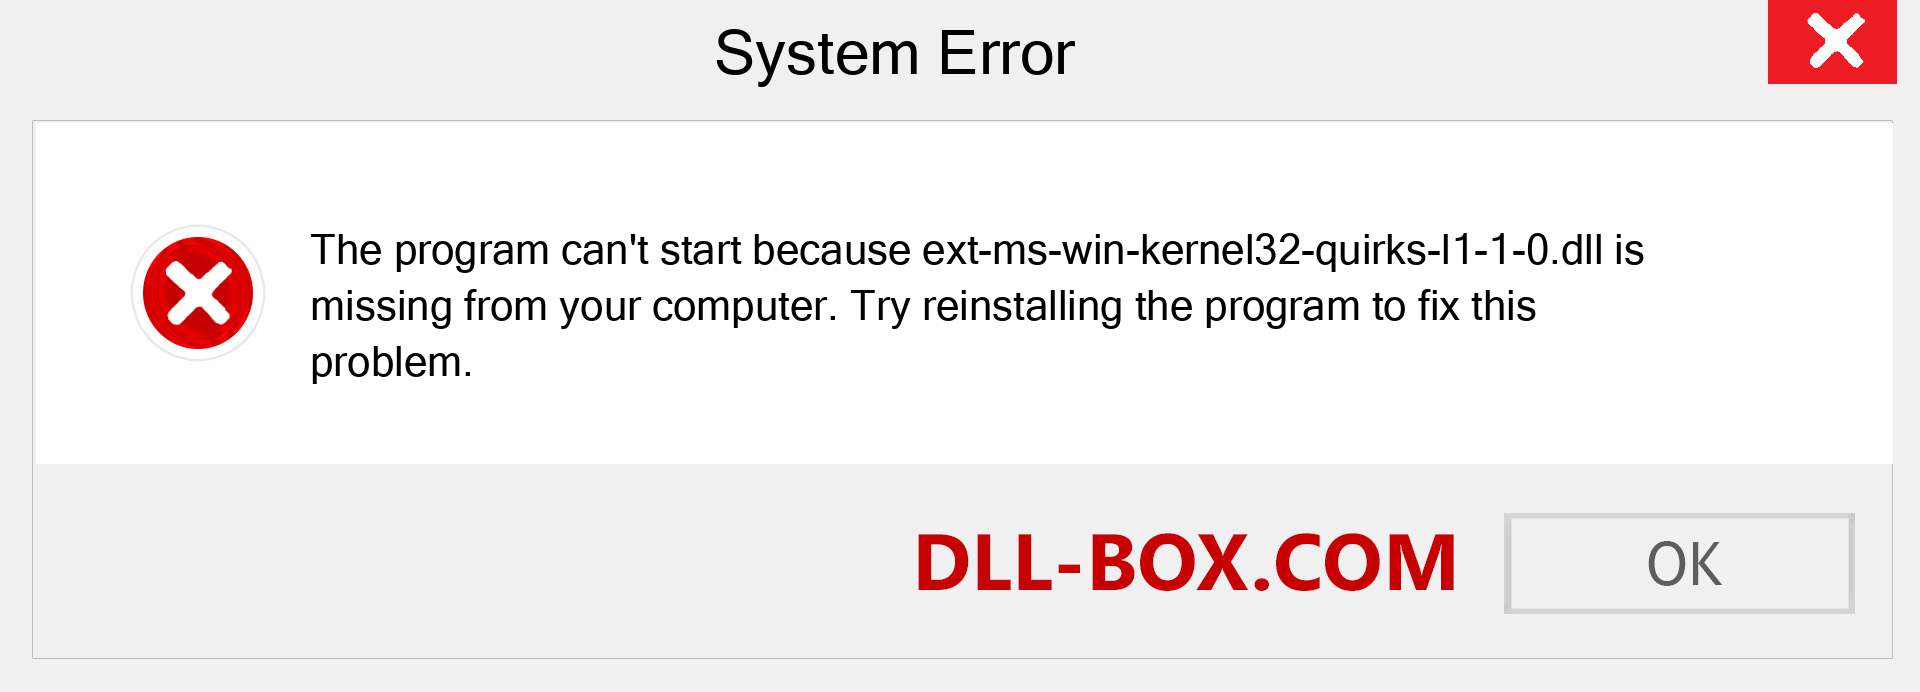  ext-ms-win-kernel32-quirks-l1-1-0.dll file is missing?. Download for Windows 7, 8, 10 - Fix  ext-ms-win-kernel32-quirks-l1-1-0 dll Missing Error on Windows, photos, images